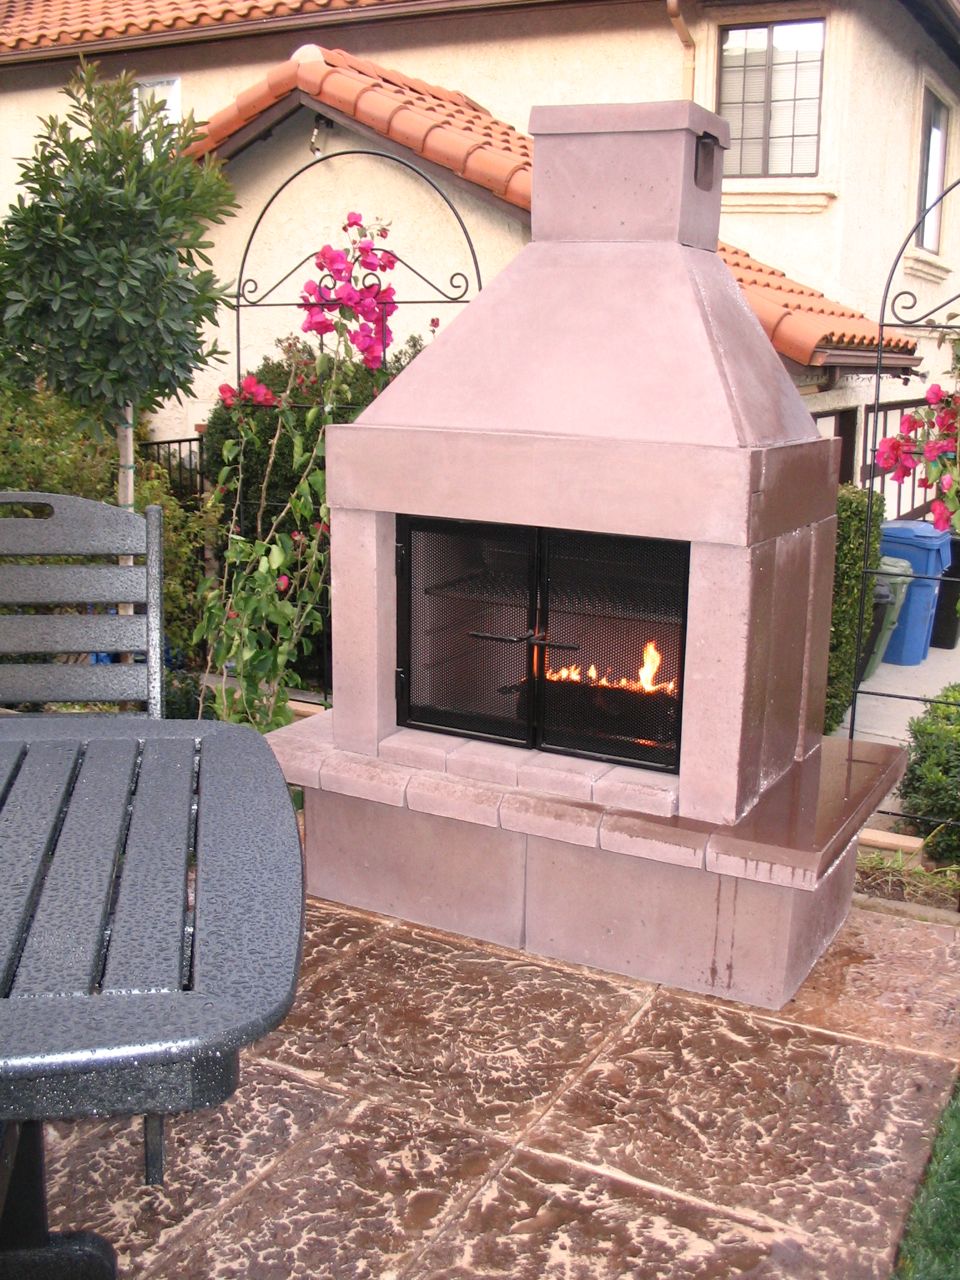 Diy Modular Outdoor Fireplace By Mirage, Mirage Stone Outdoor Fireplace